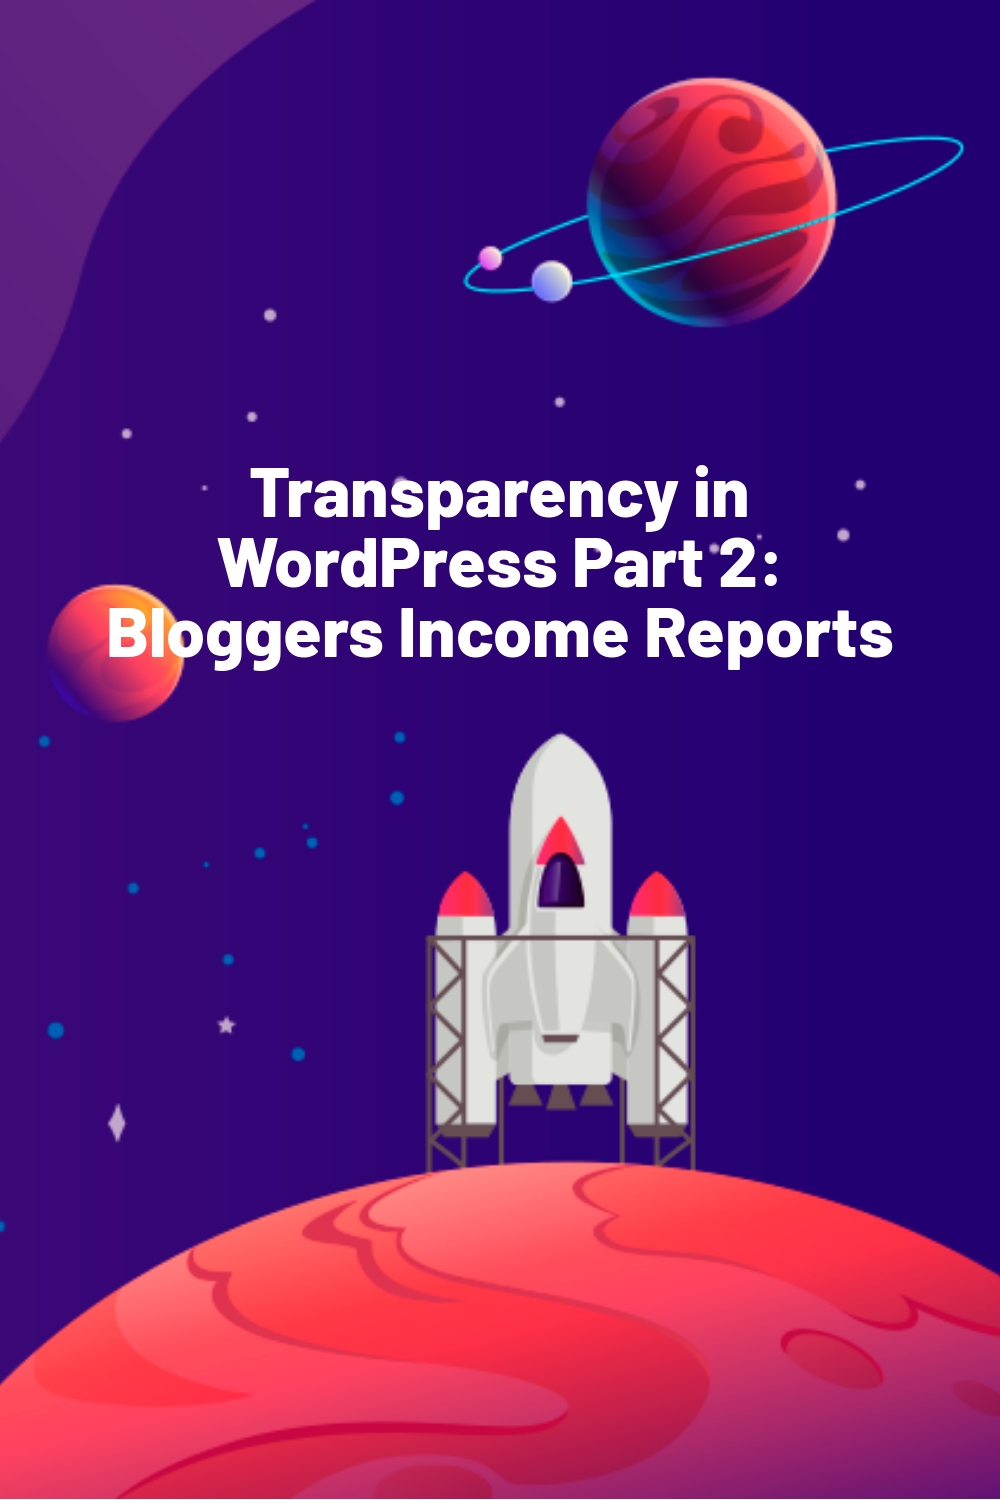 Transparency in WordPress Part 2: Bloggers Income Reports